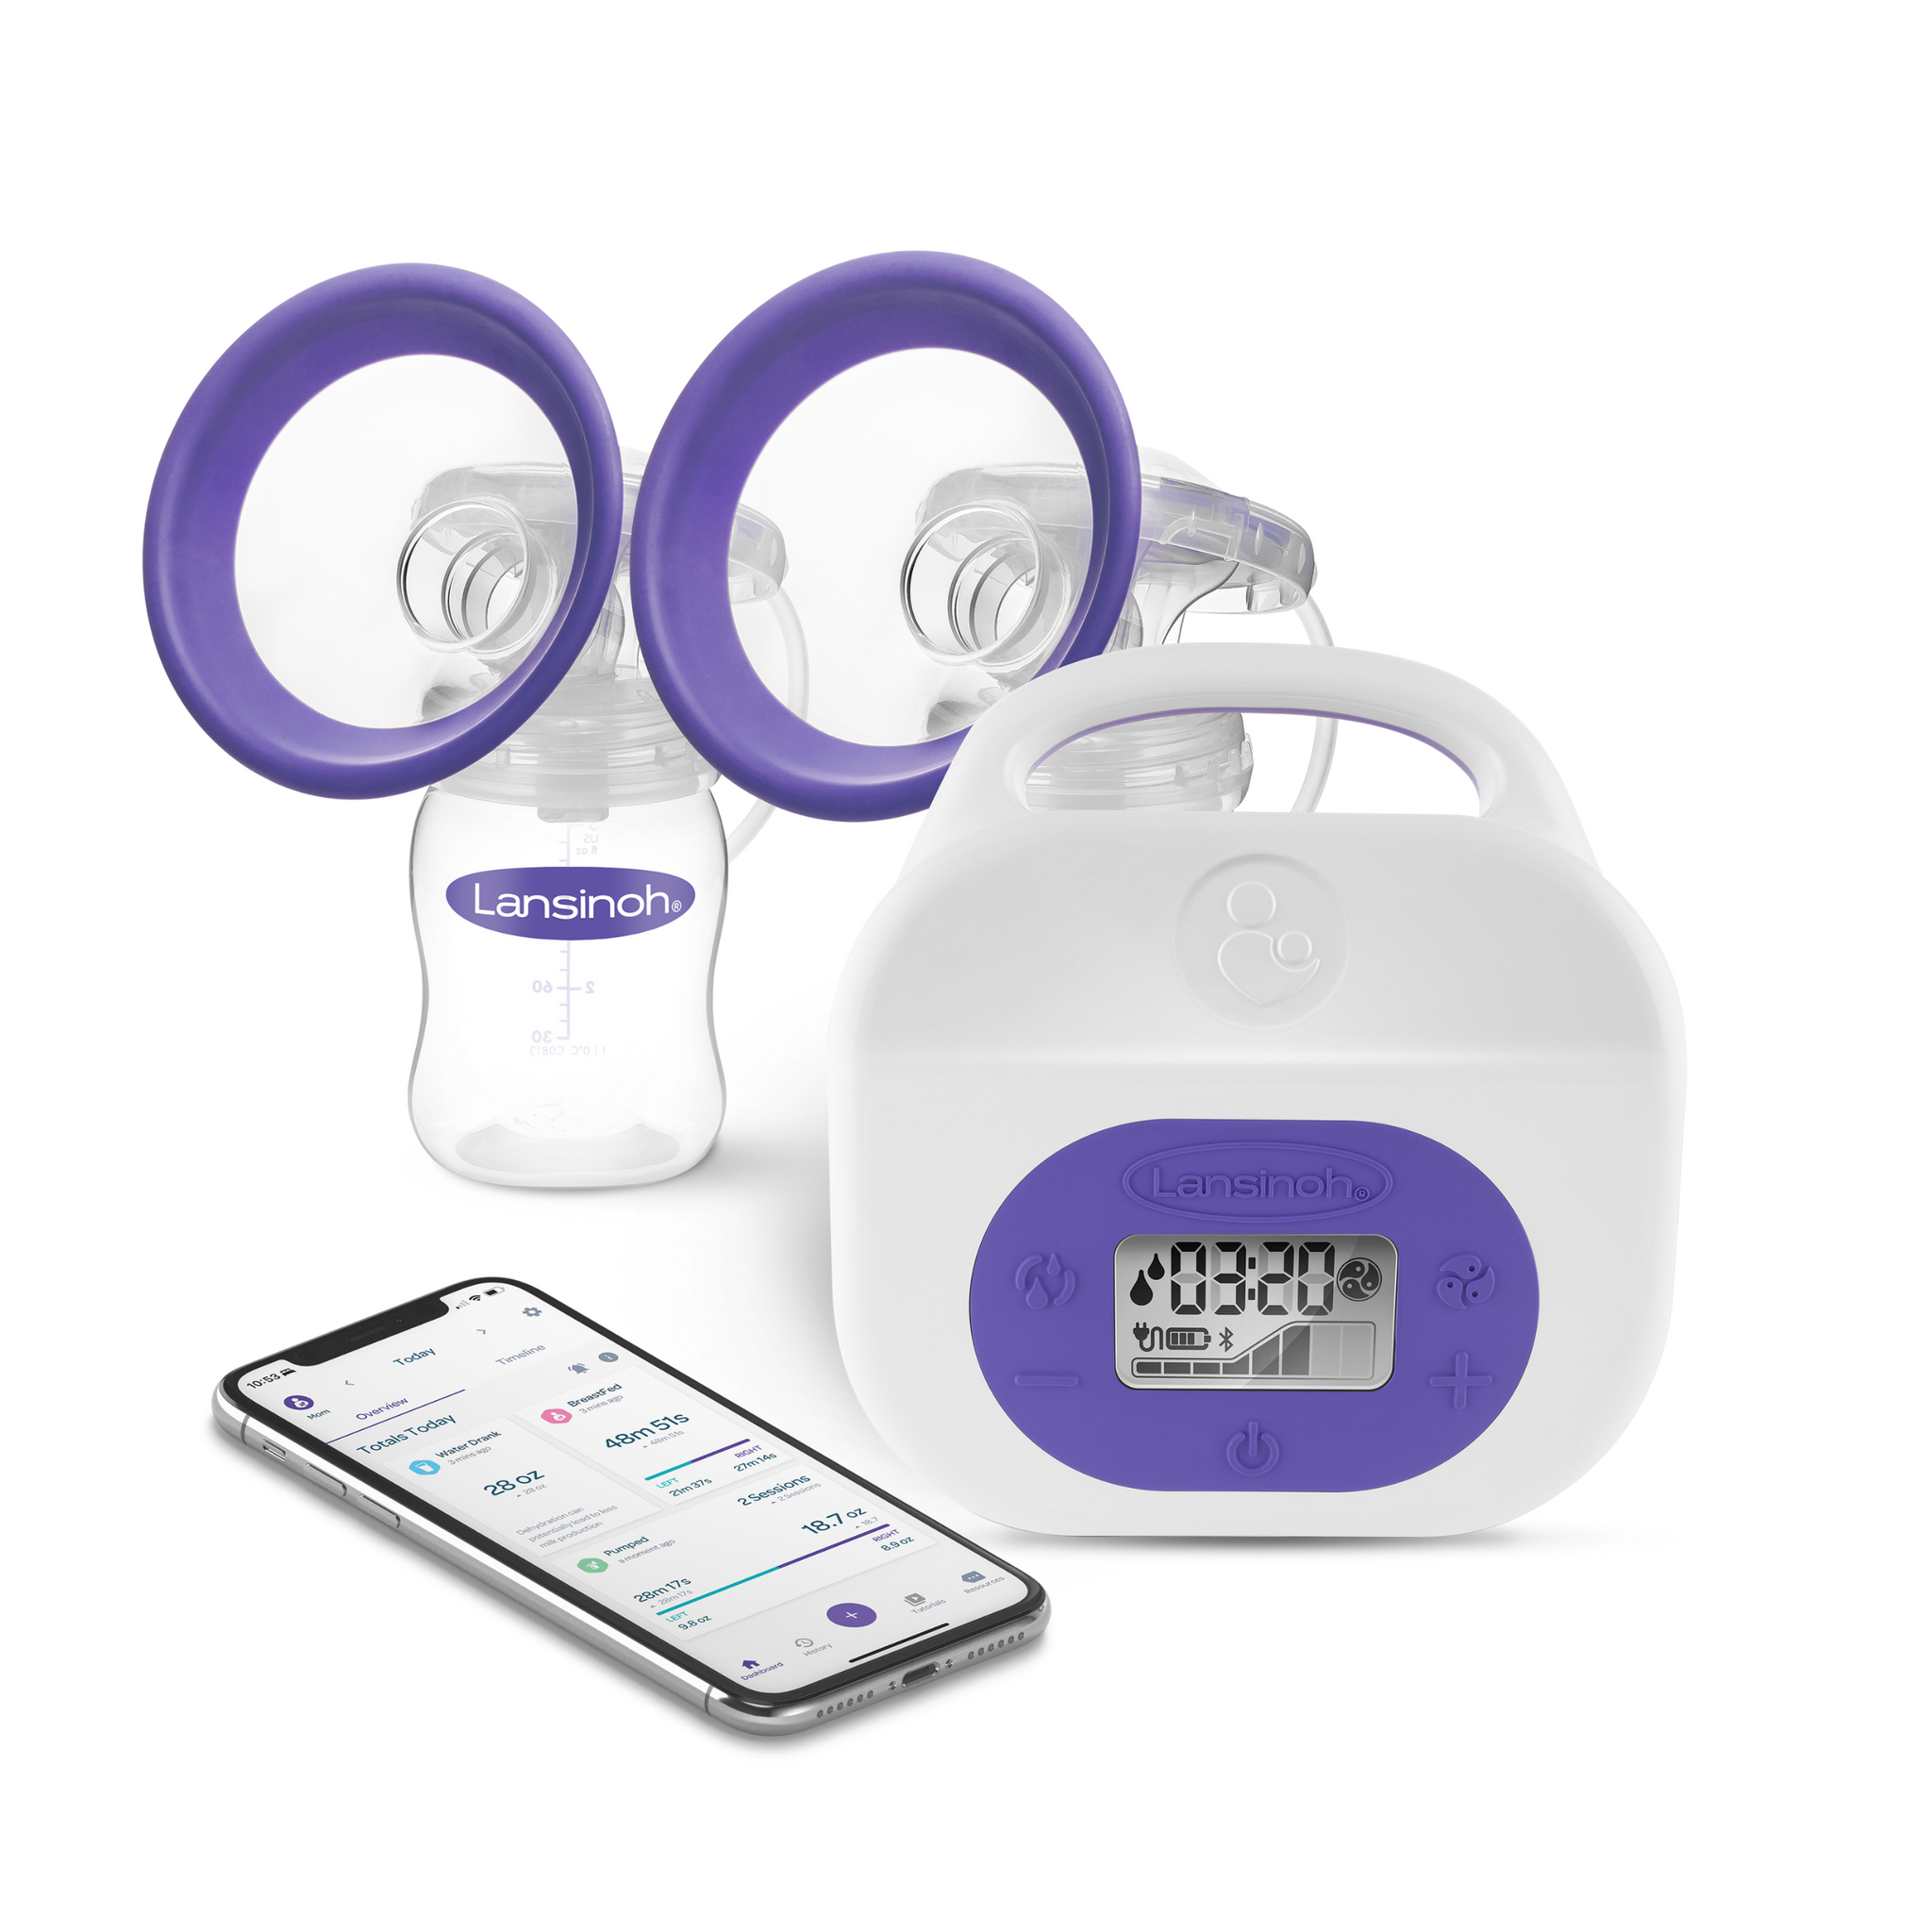 Lansinoh Smartpump Double Electric Breast Pump - A Quality Breast